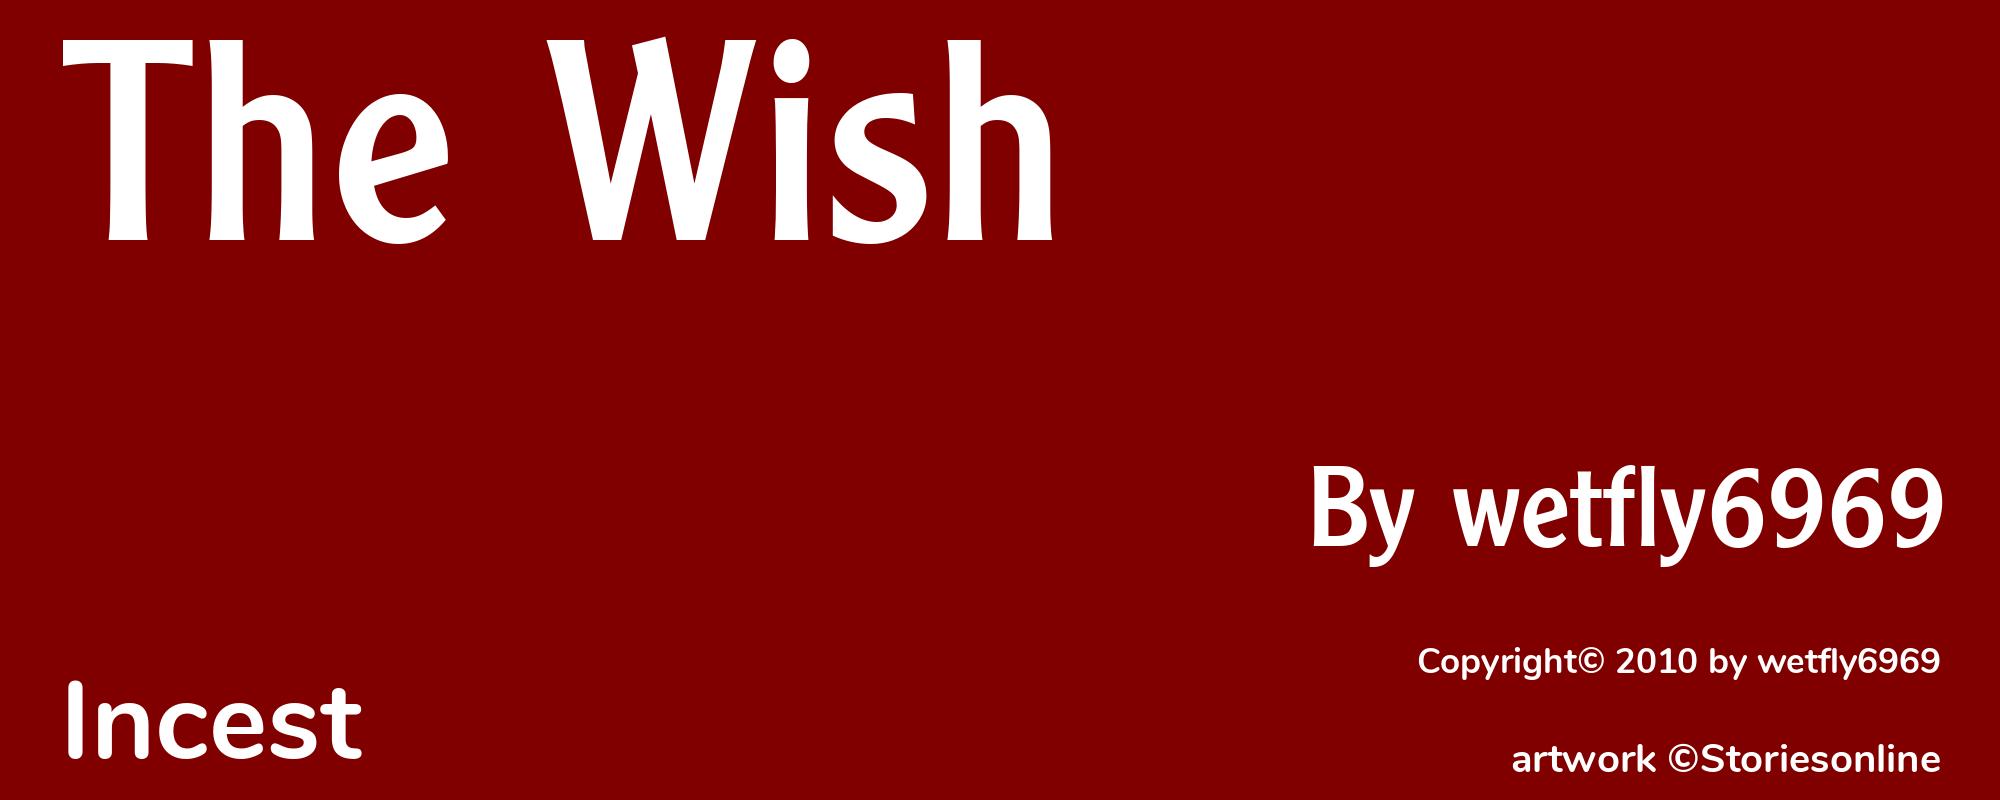 The Wish - Cover